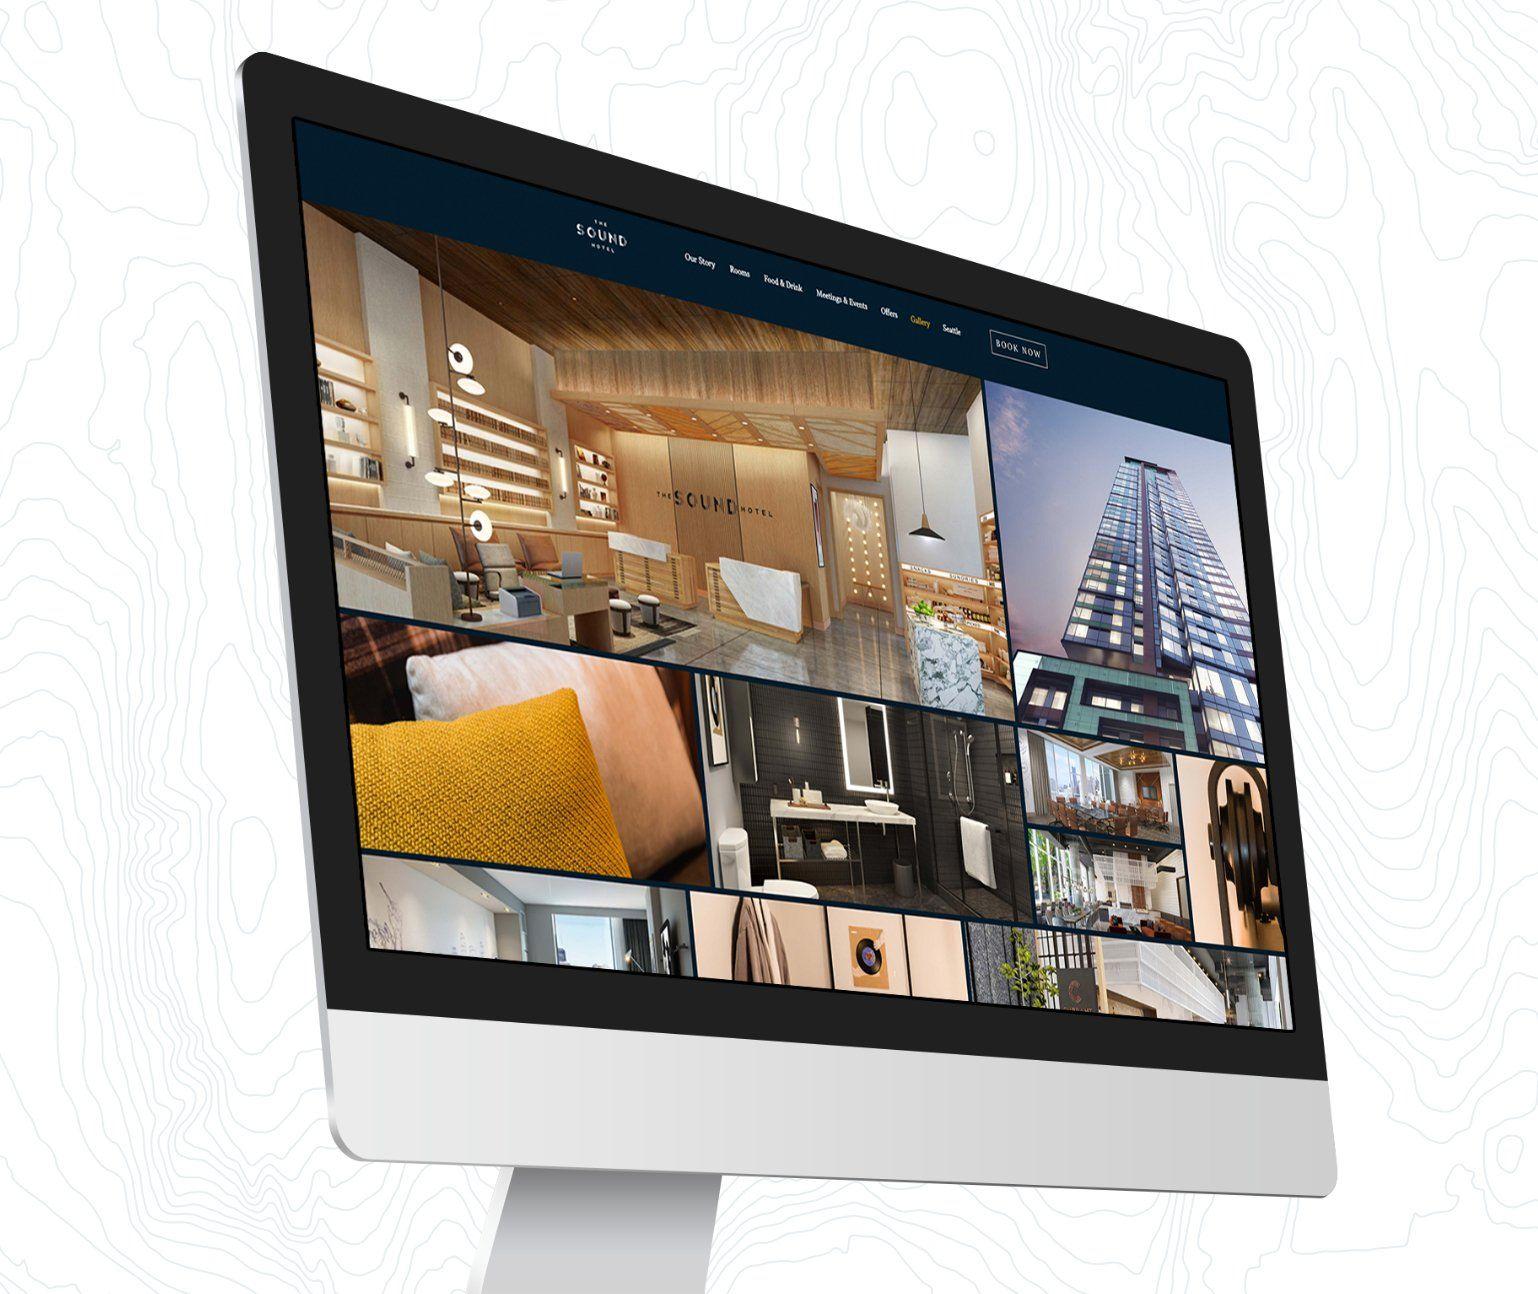 The Sound Hotel website design shown at an angle on a computer monitor